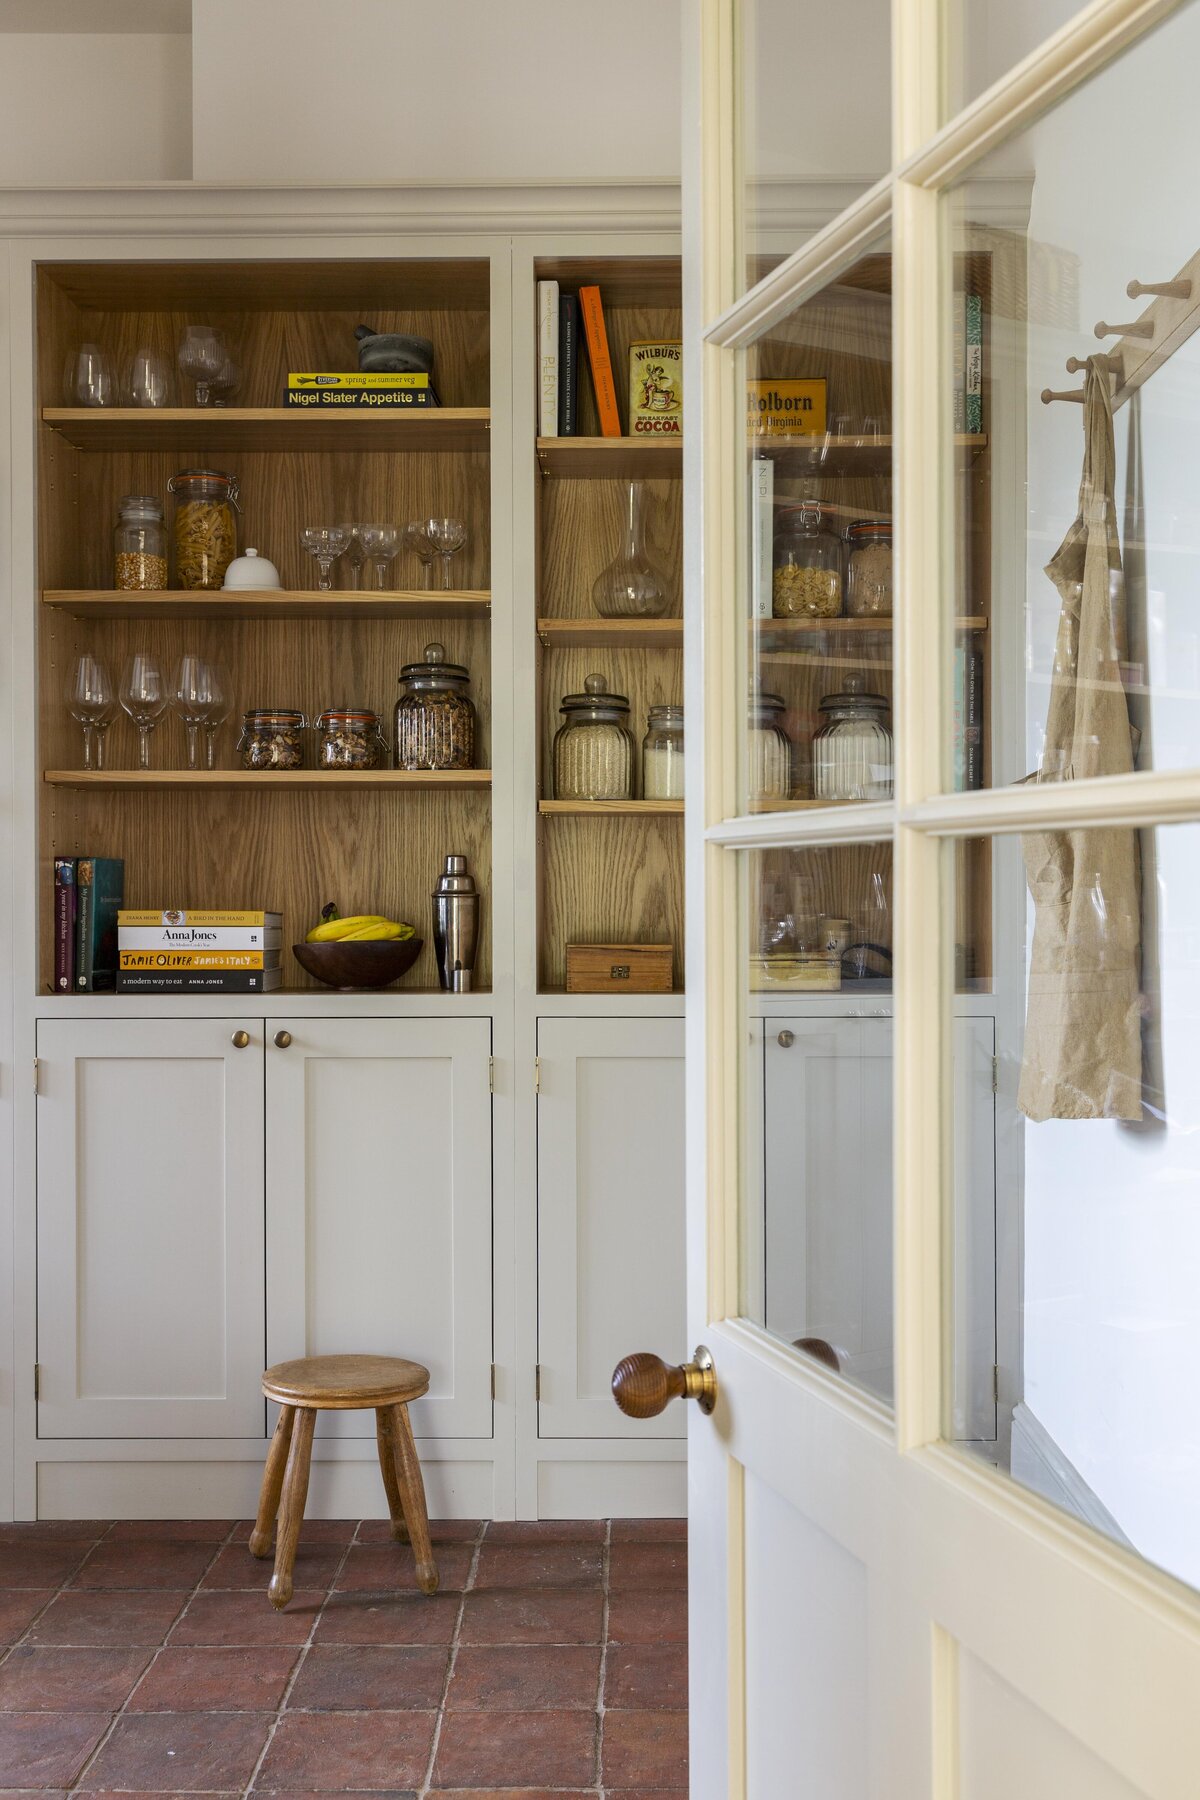 Opening into the pantry with fully stocked shelves and a small antique wooden stool